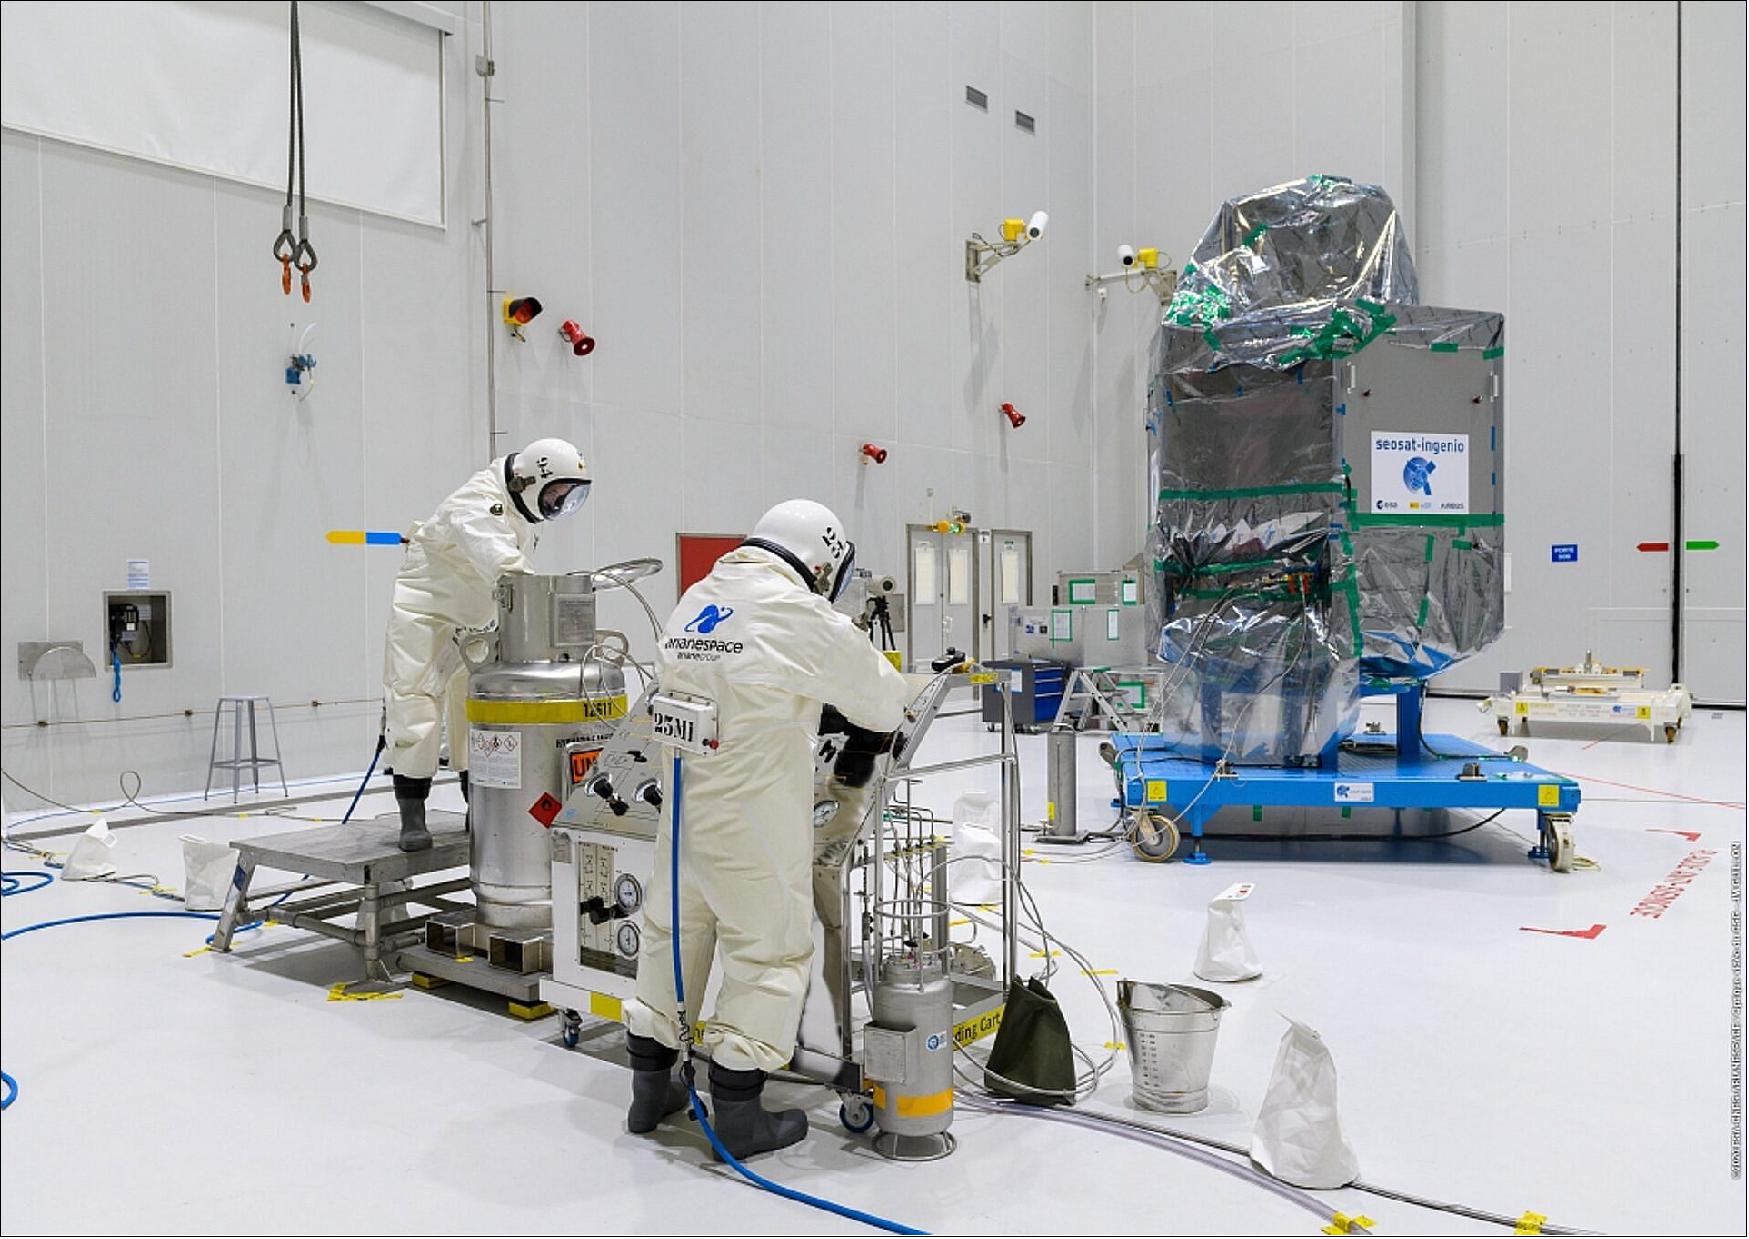 Figure 10: SEOSAT-Ingenio is being fuelled in room S5A of the Payload Processing Facility of Europe's Spaceport in Kourou, French Guiana on 15 October, 2020 (image credit: ESA/CNES/Arianespace/Optique Video du CSG - JM Guillon)